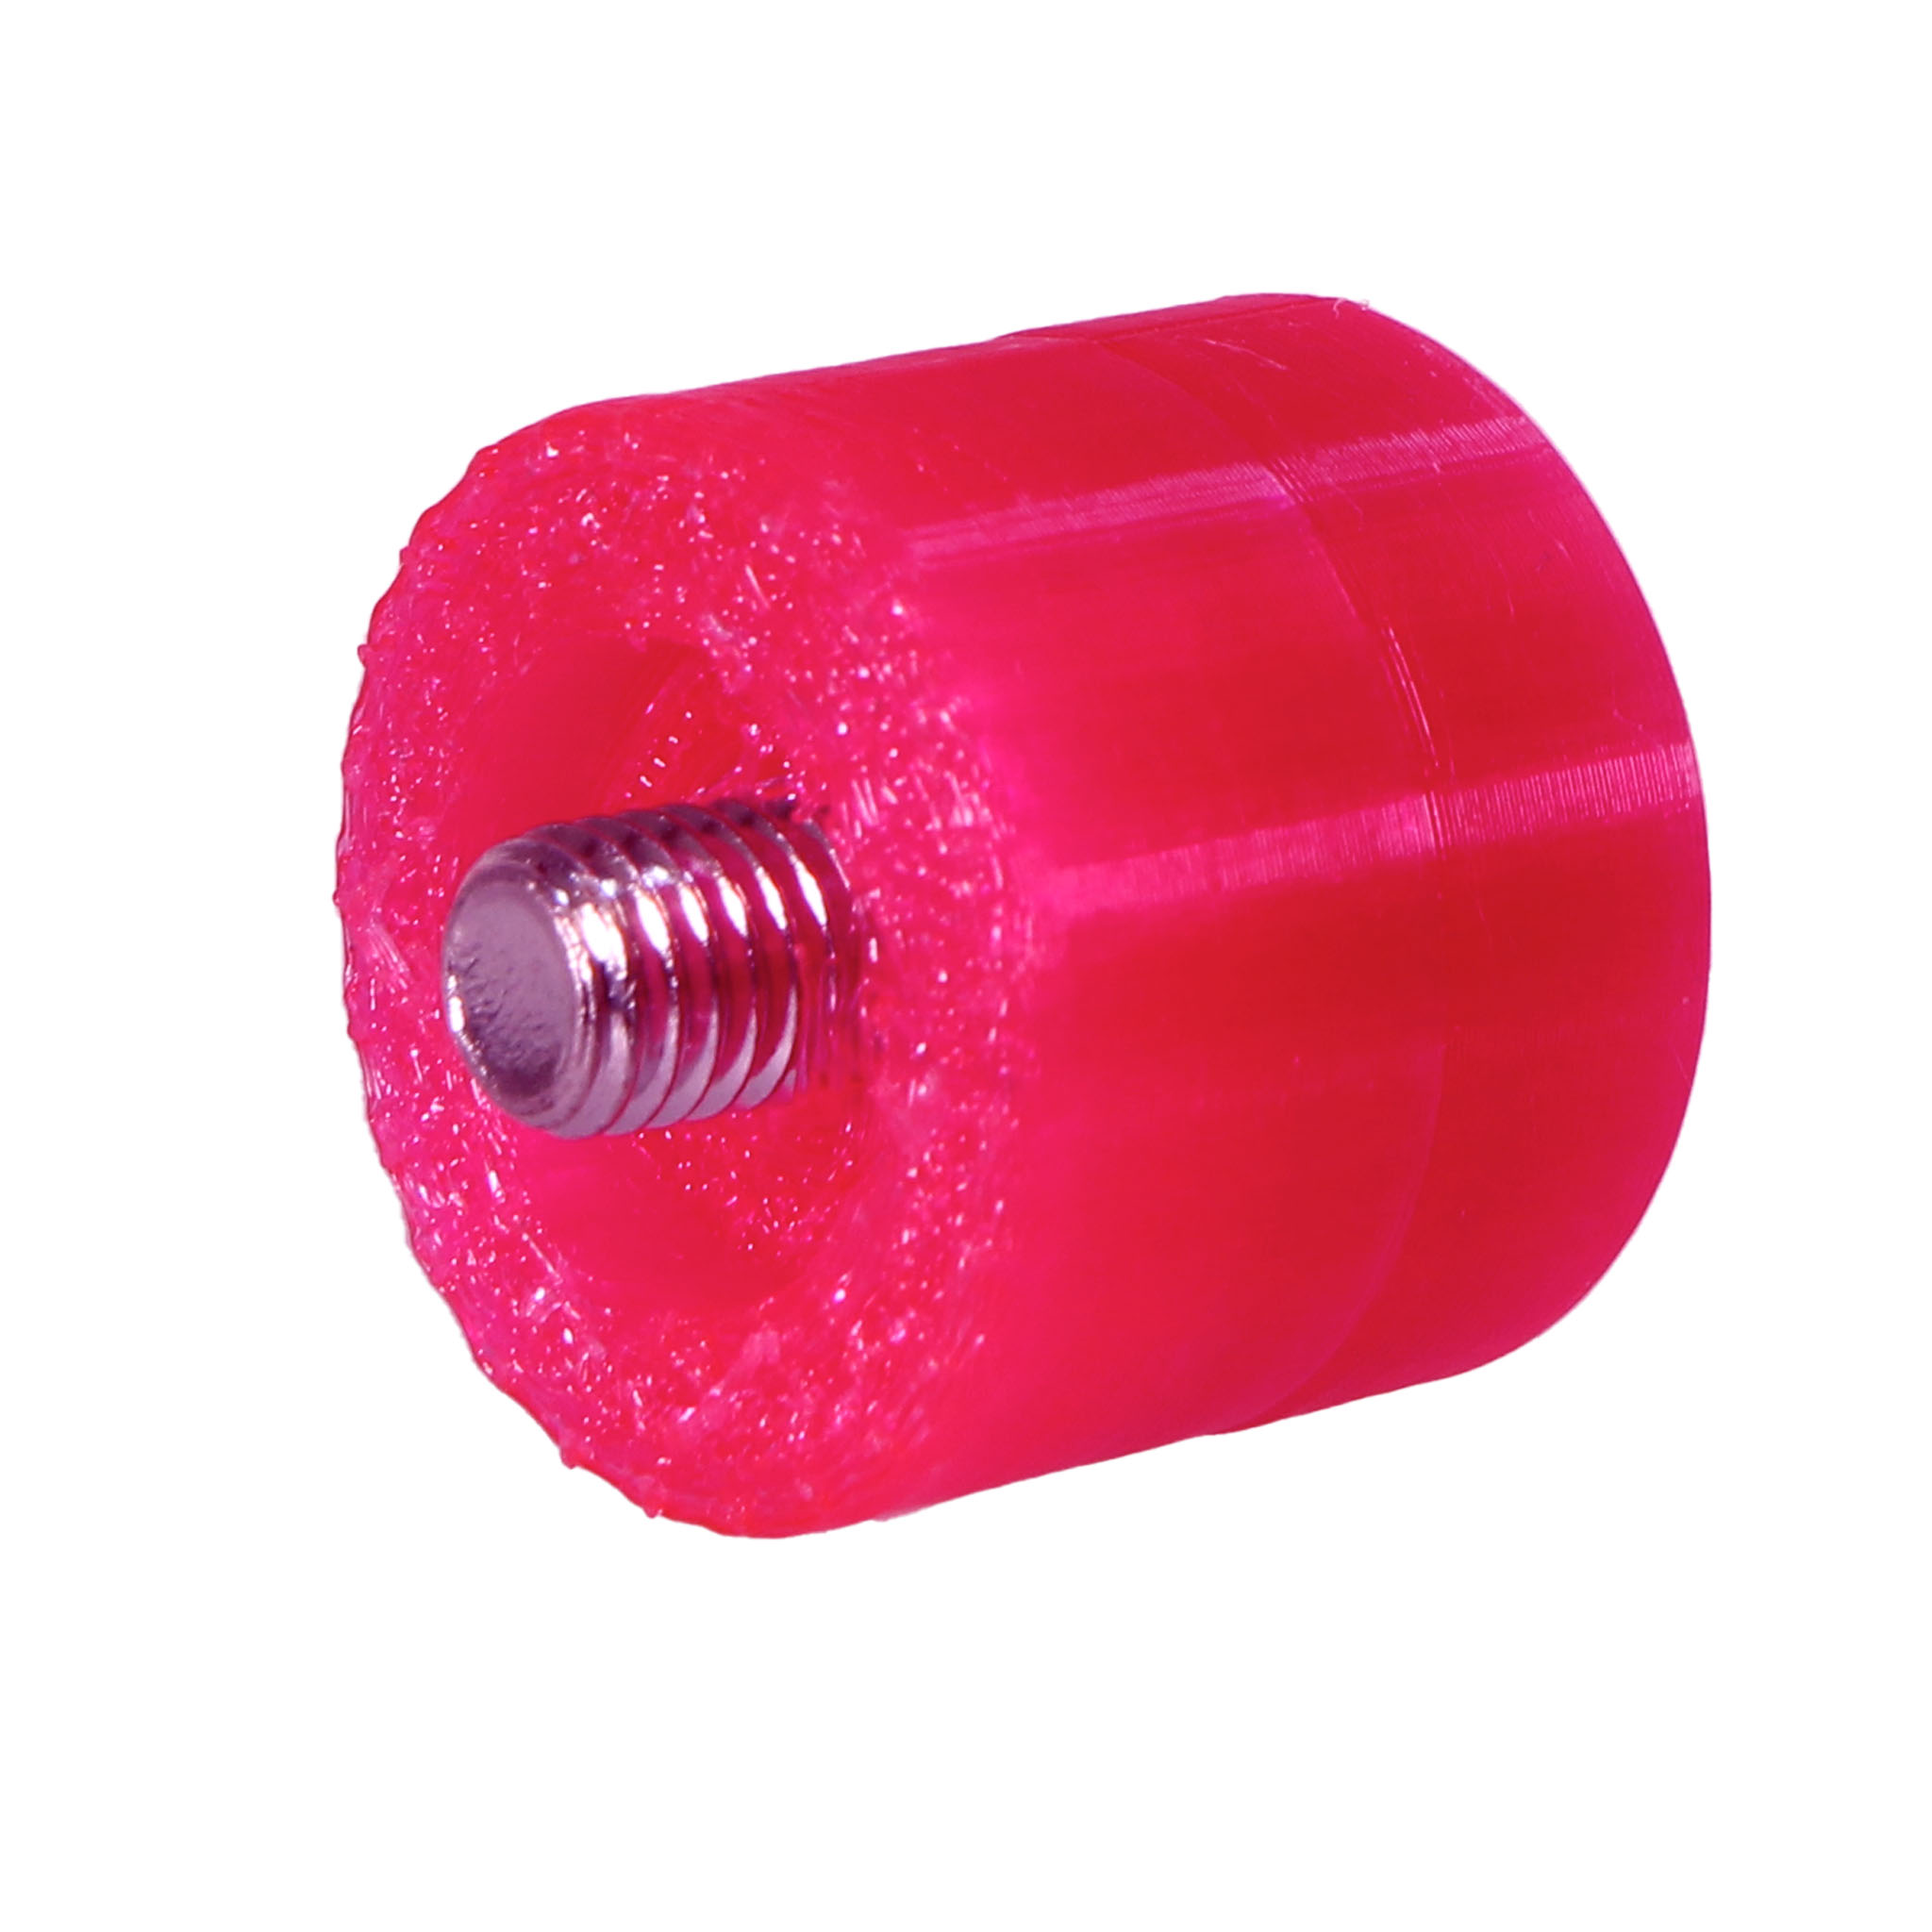 Elevation Wheel Co Replacement Head for Park HMR-2 Shop Hammer, Pink